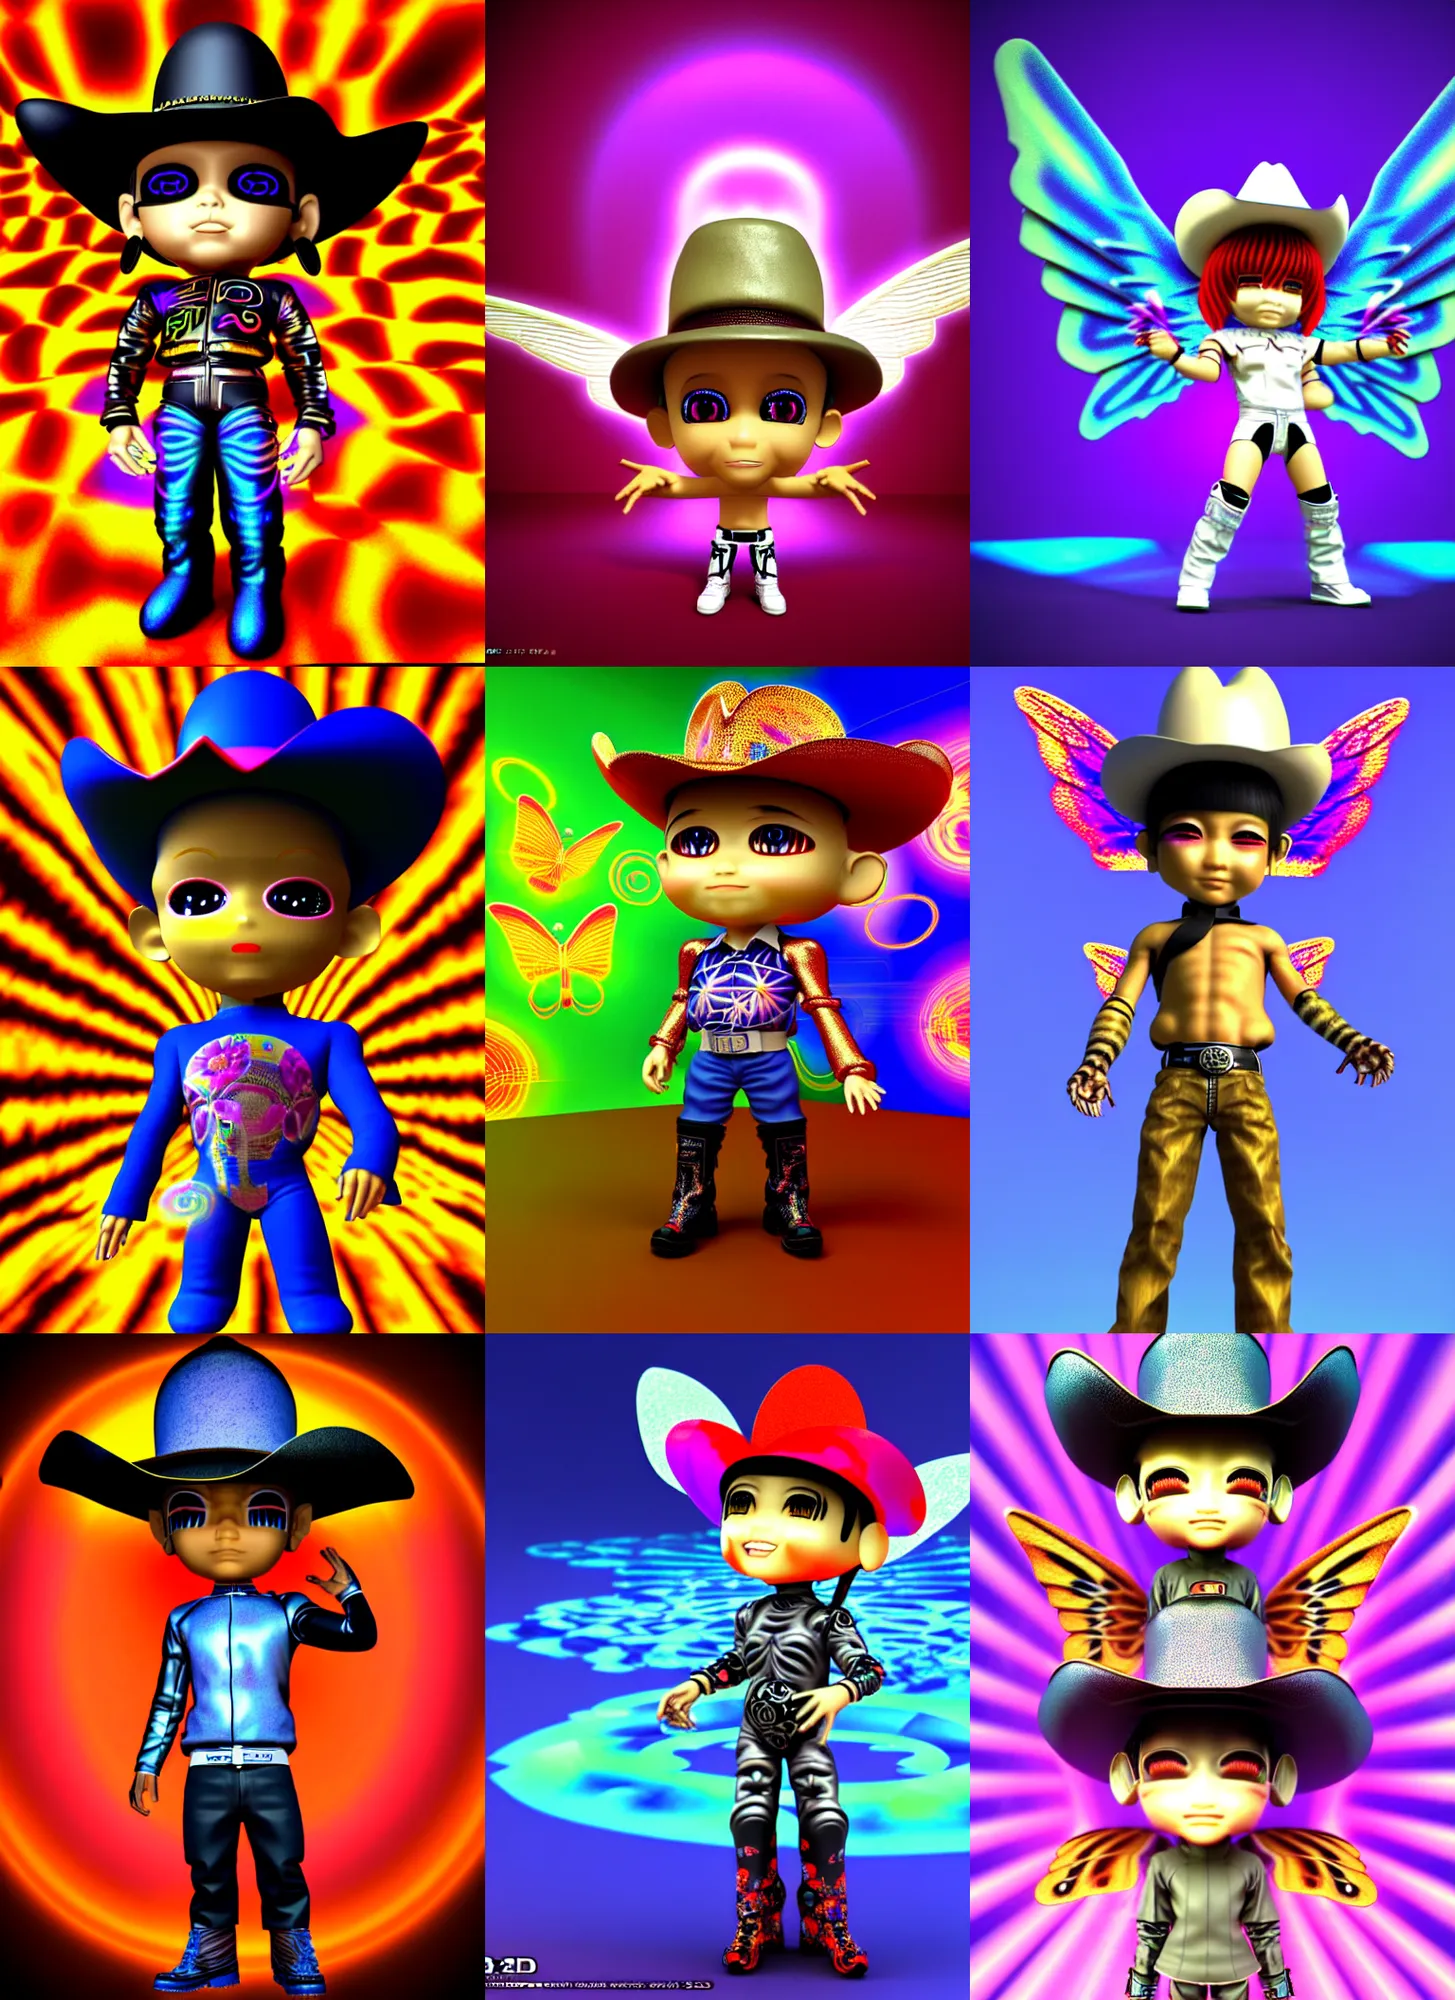 Prompt: 3d render of chibi cyborg in the style of Ichiro Tanida wearing a big cowboy hat and wearing angel wings against a psychedelic swirly background with 3d butterflies and 3d flowers n the style of 1990's CG graphics 3d rendered y2K aesthetic by Ichiro Tanida, 3DO magazine